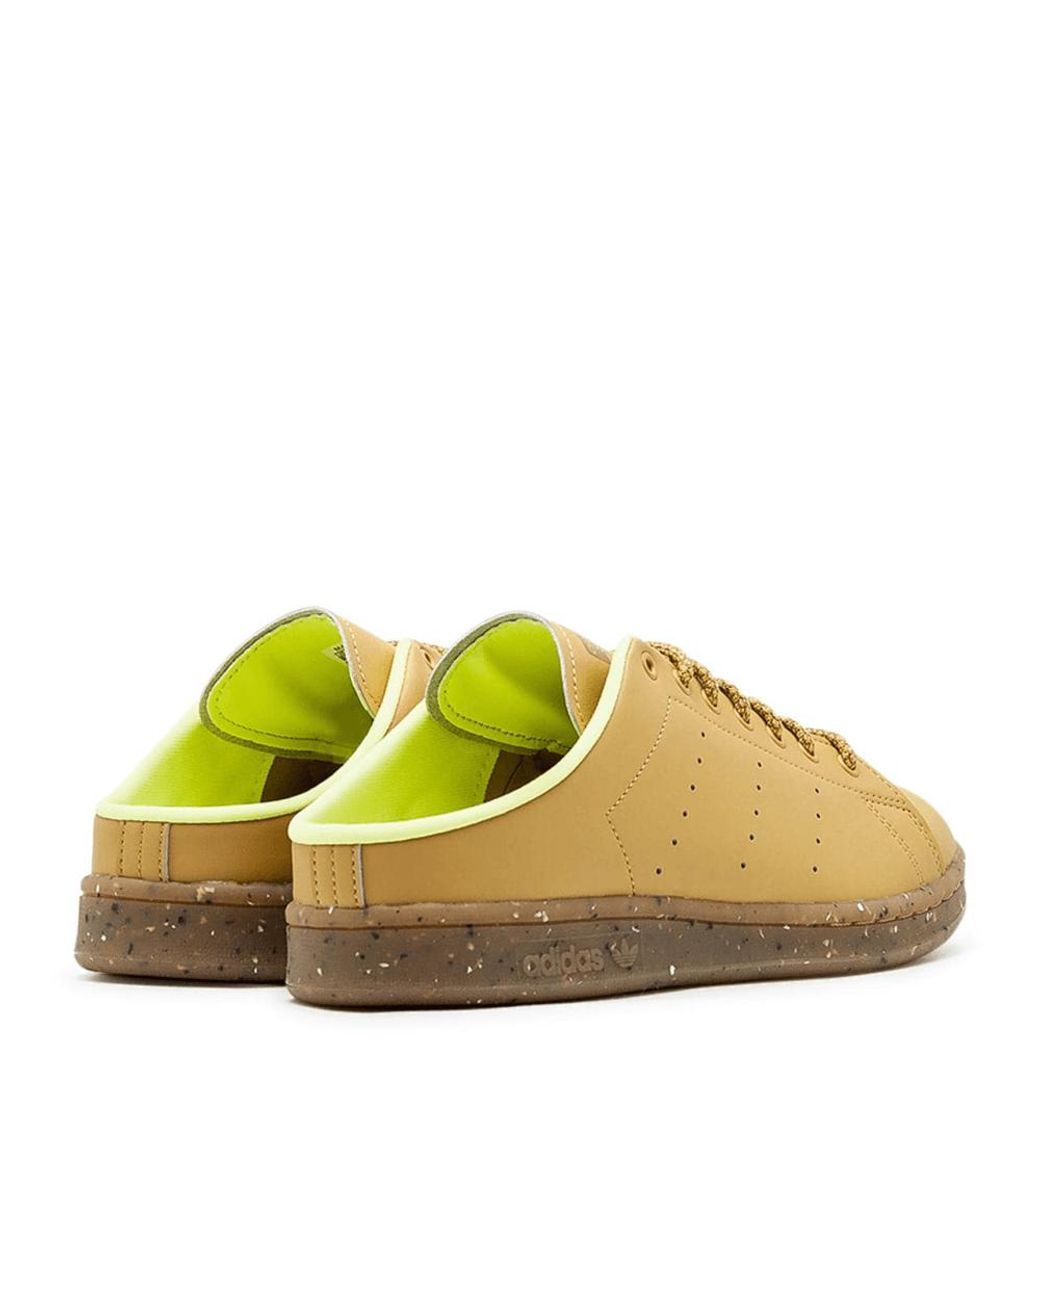 adidas Originals Stan Smith Mule Plant And Grow Pla in Yellow | Lyst